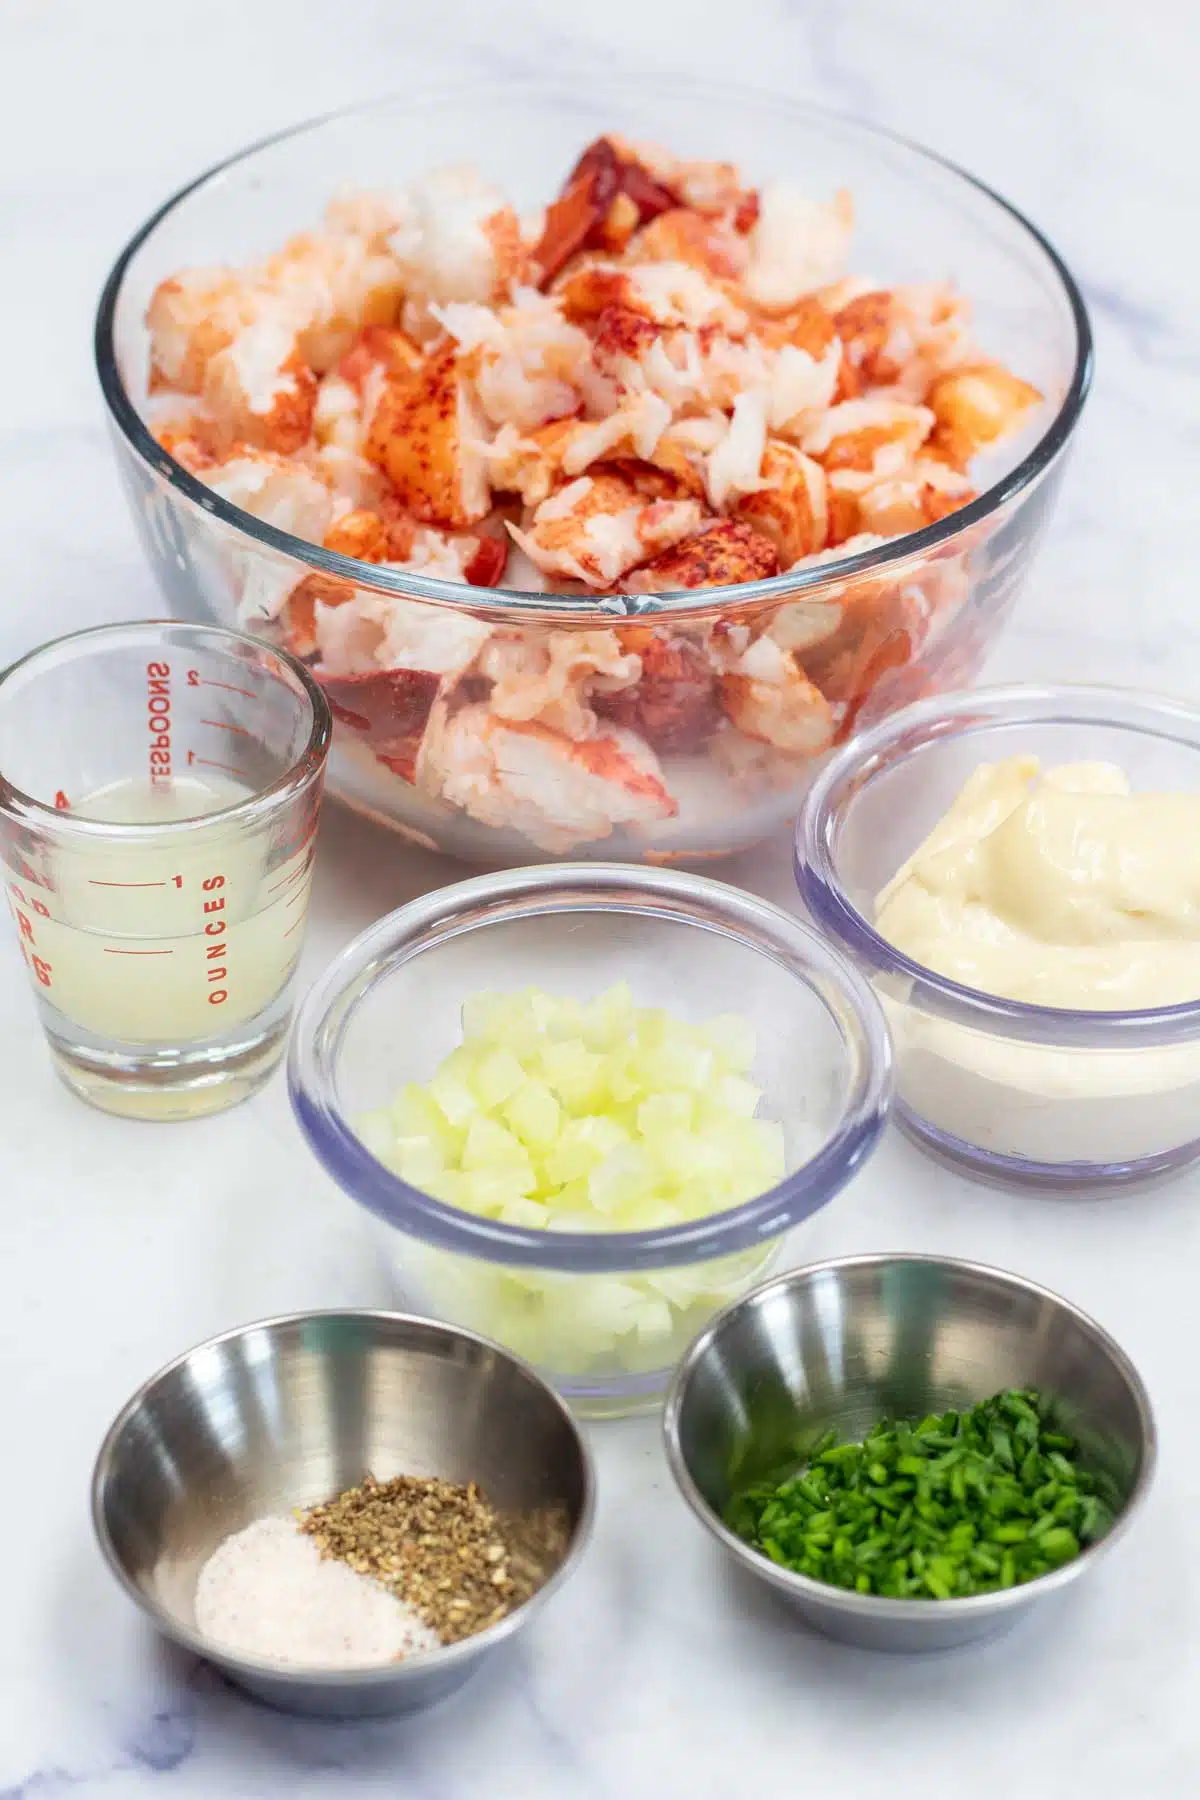 Tall image showing lobster salad ingredients.